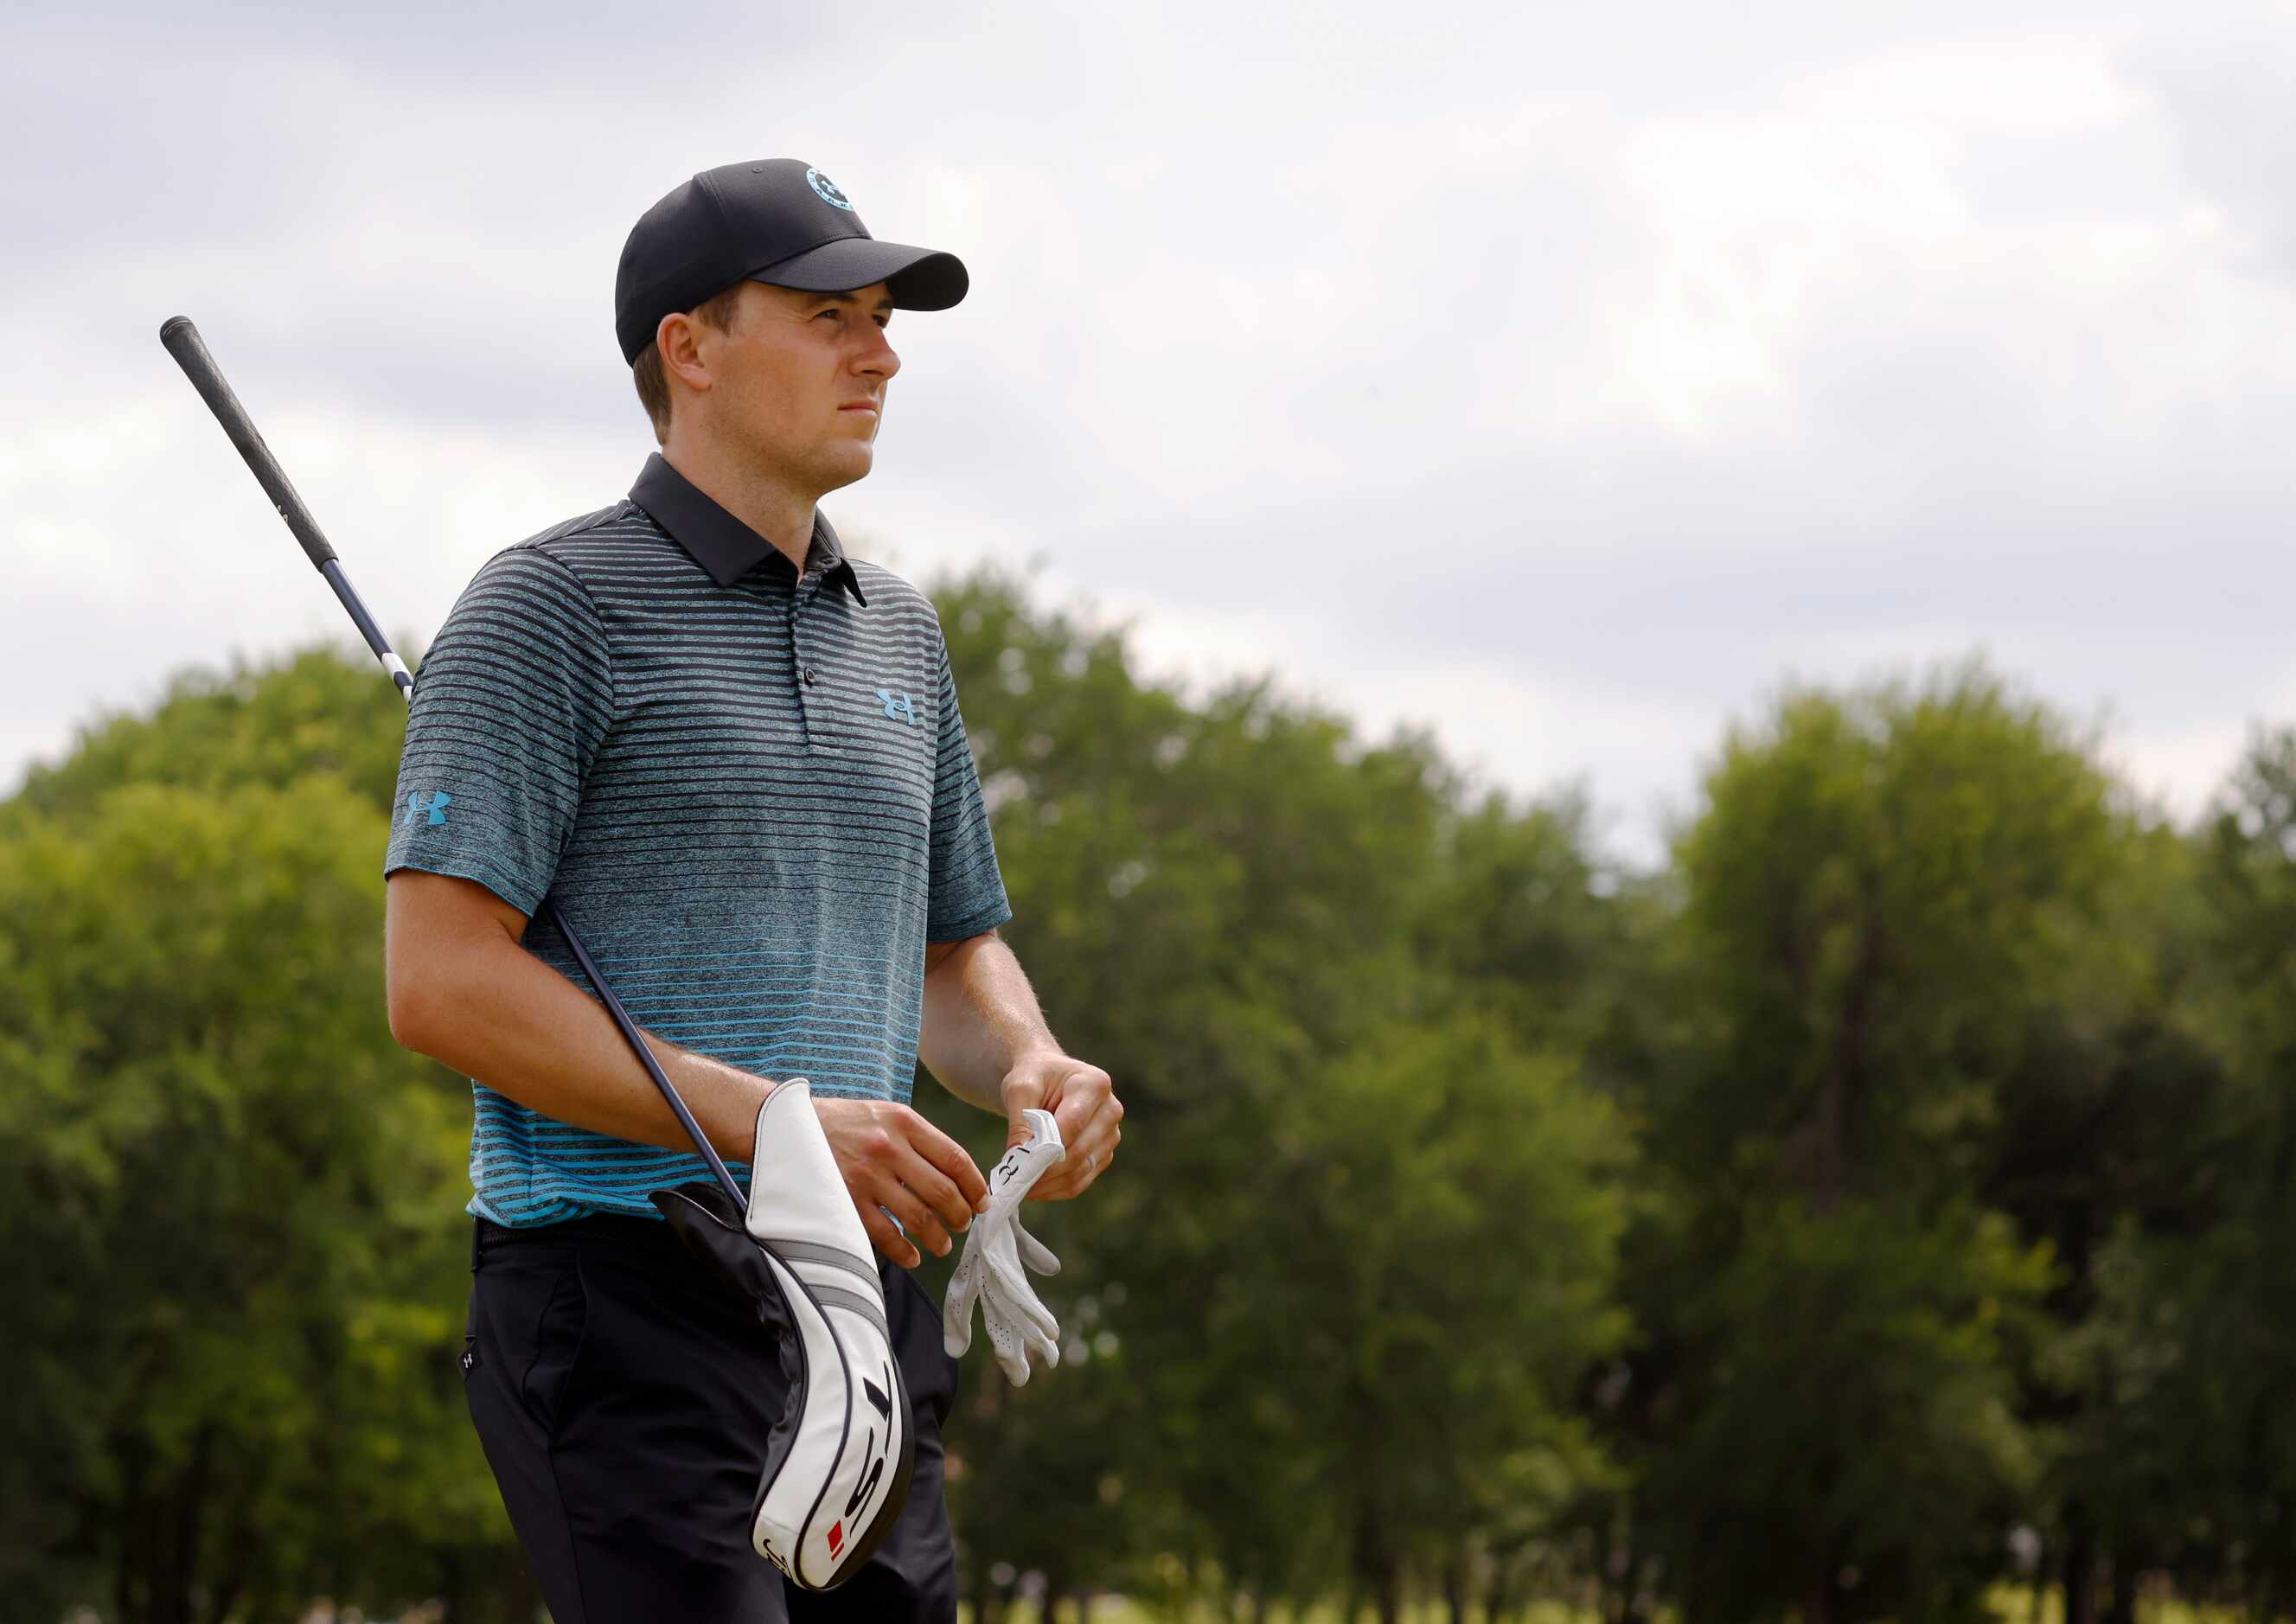 Jordan Spieth makes his way to the tee box for the 13th hole during round 3 of the AT&T...